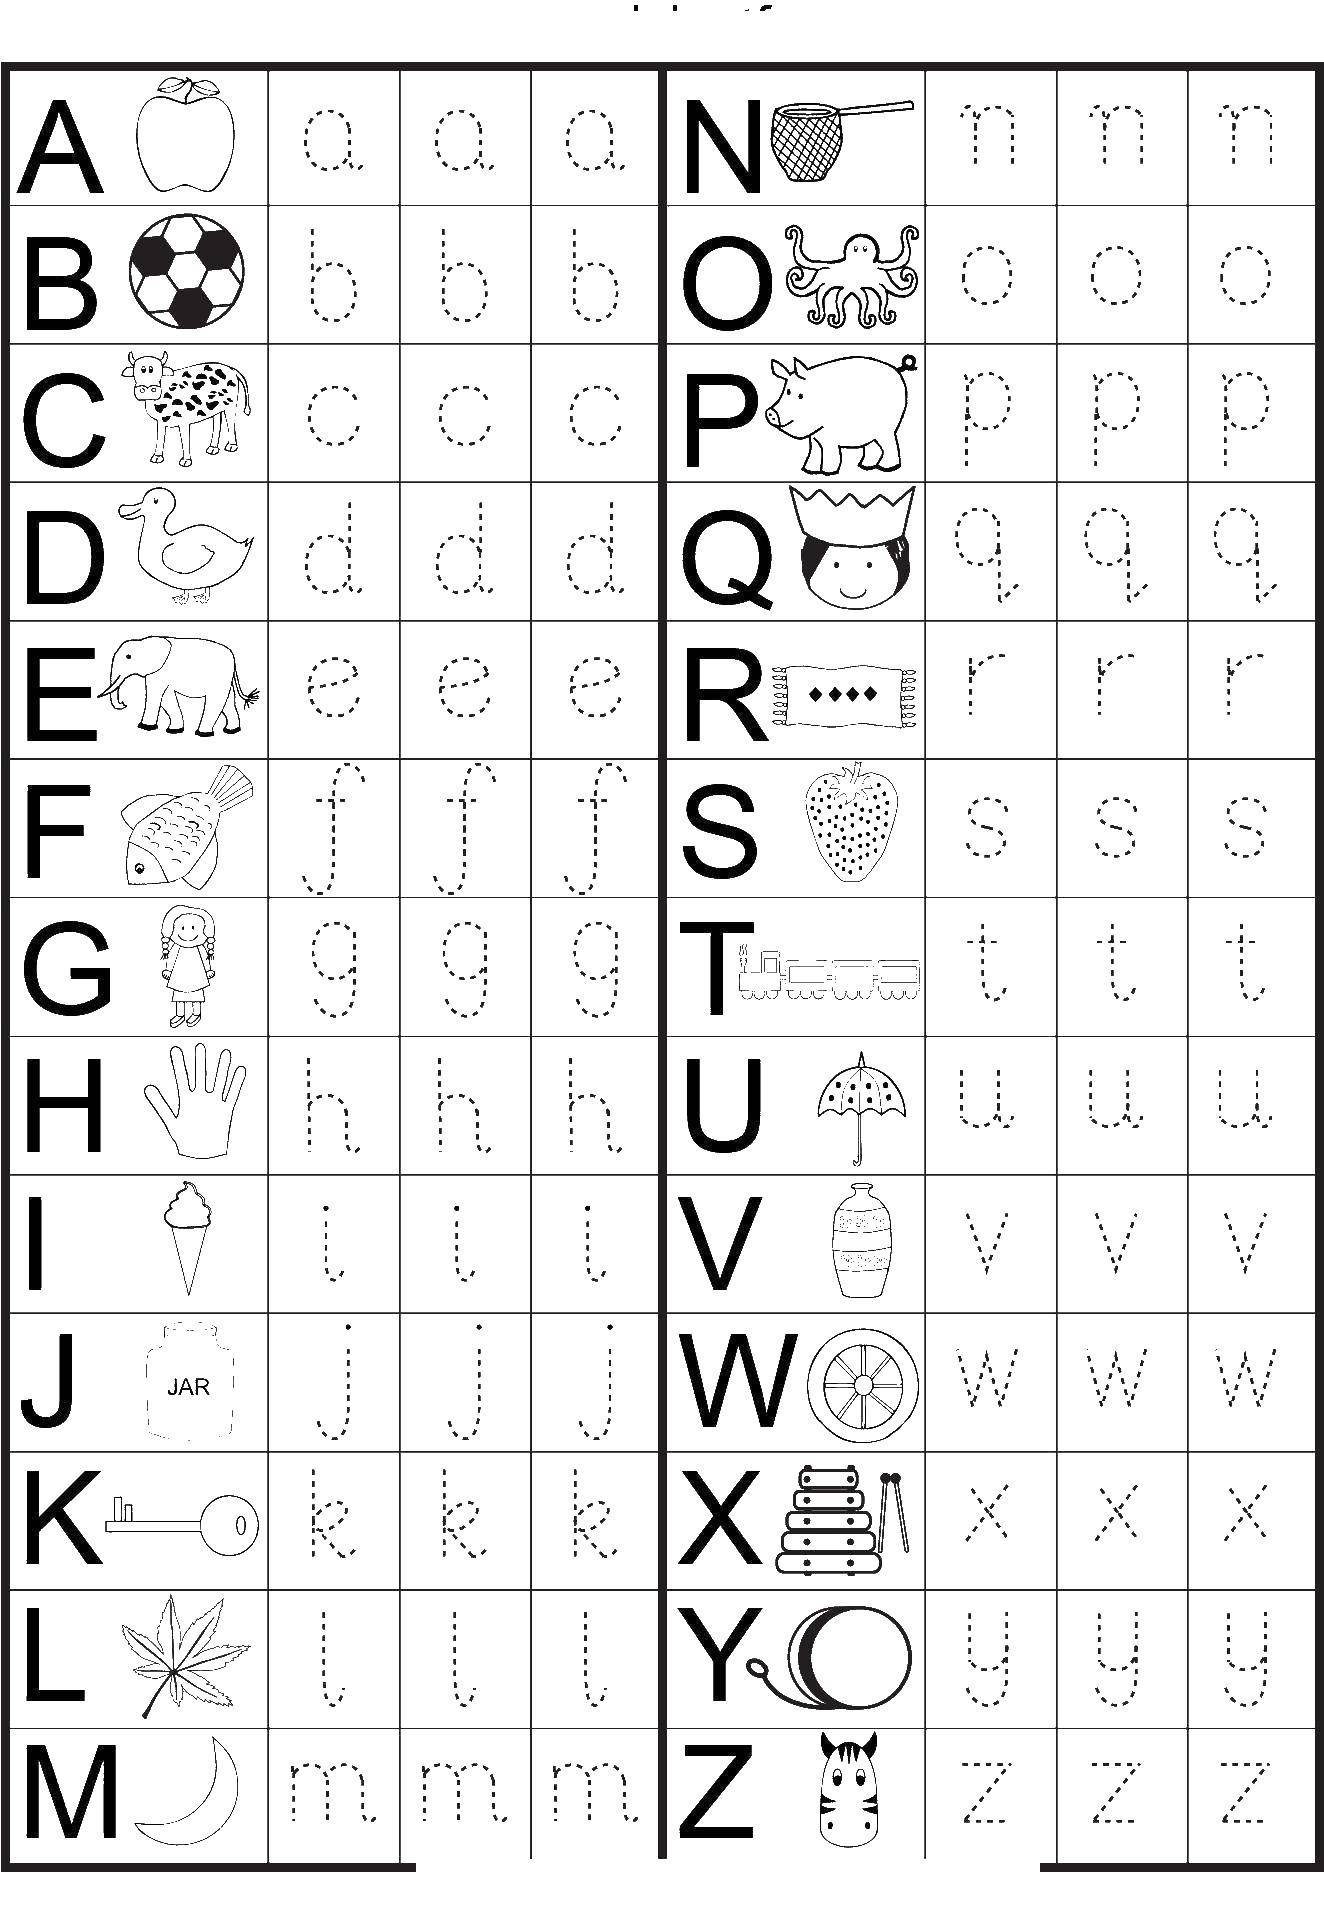 Coloring Alphabet cursive. Category mathematical coloring pages. Tags:  alphabet, English.